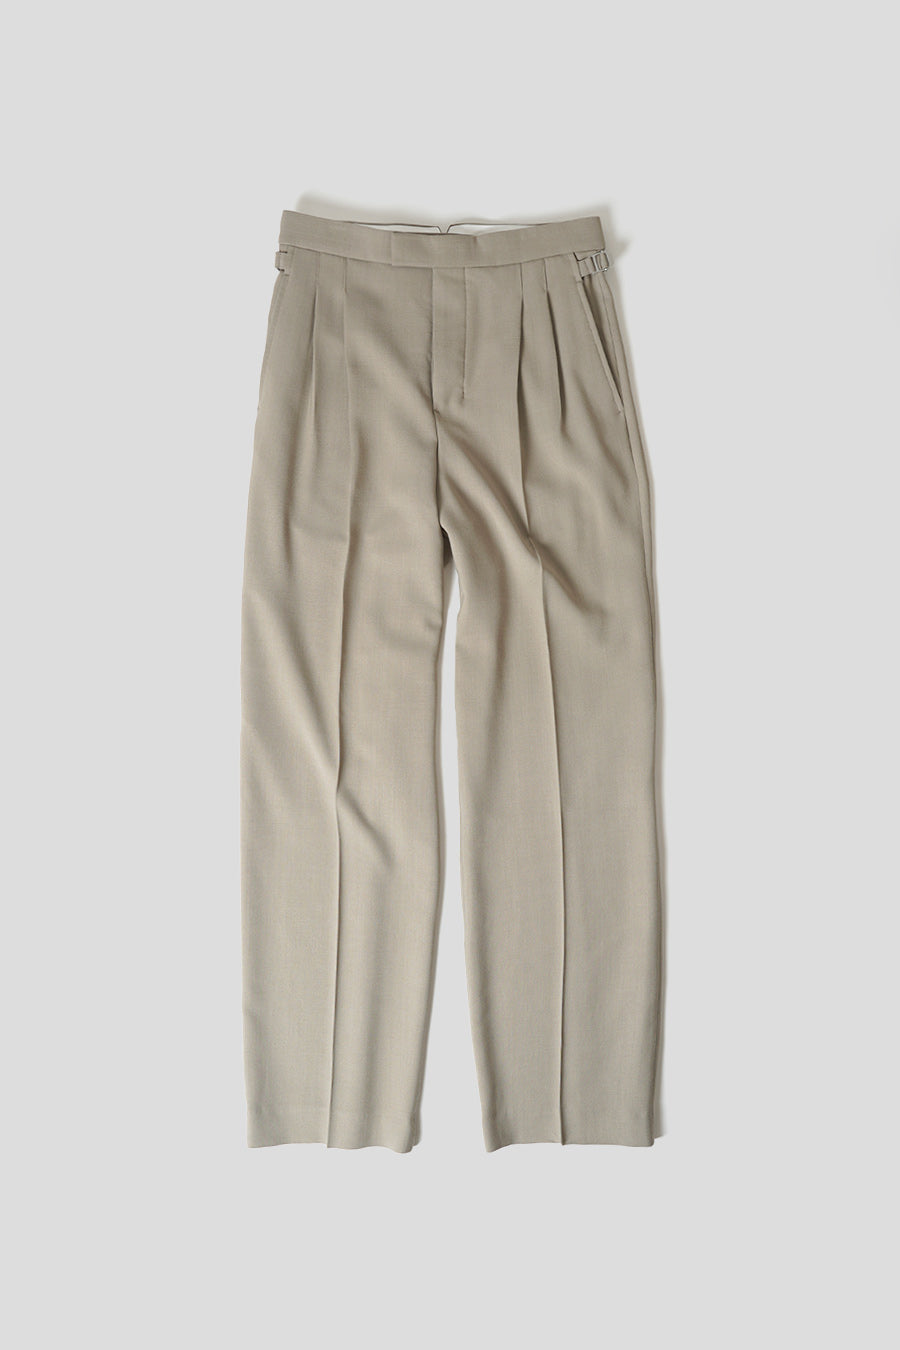 AMI PARIS - WIDE-LEG WOOL AND VISCOSE TAUPE TROUSERS - LE LABO STORE